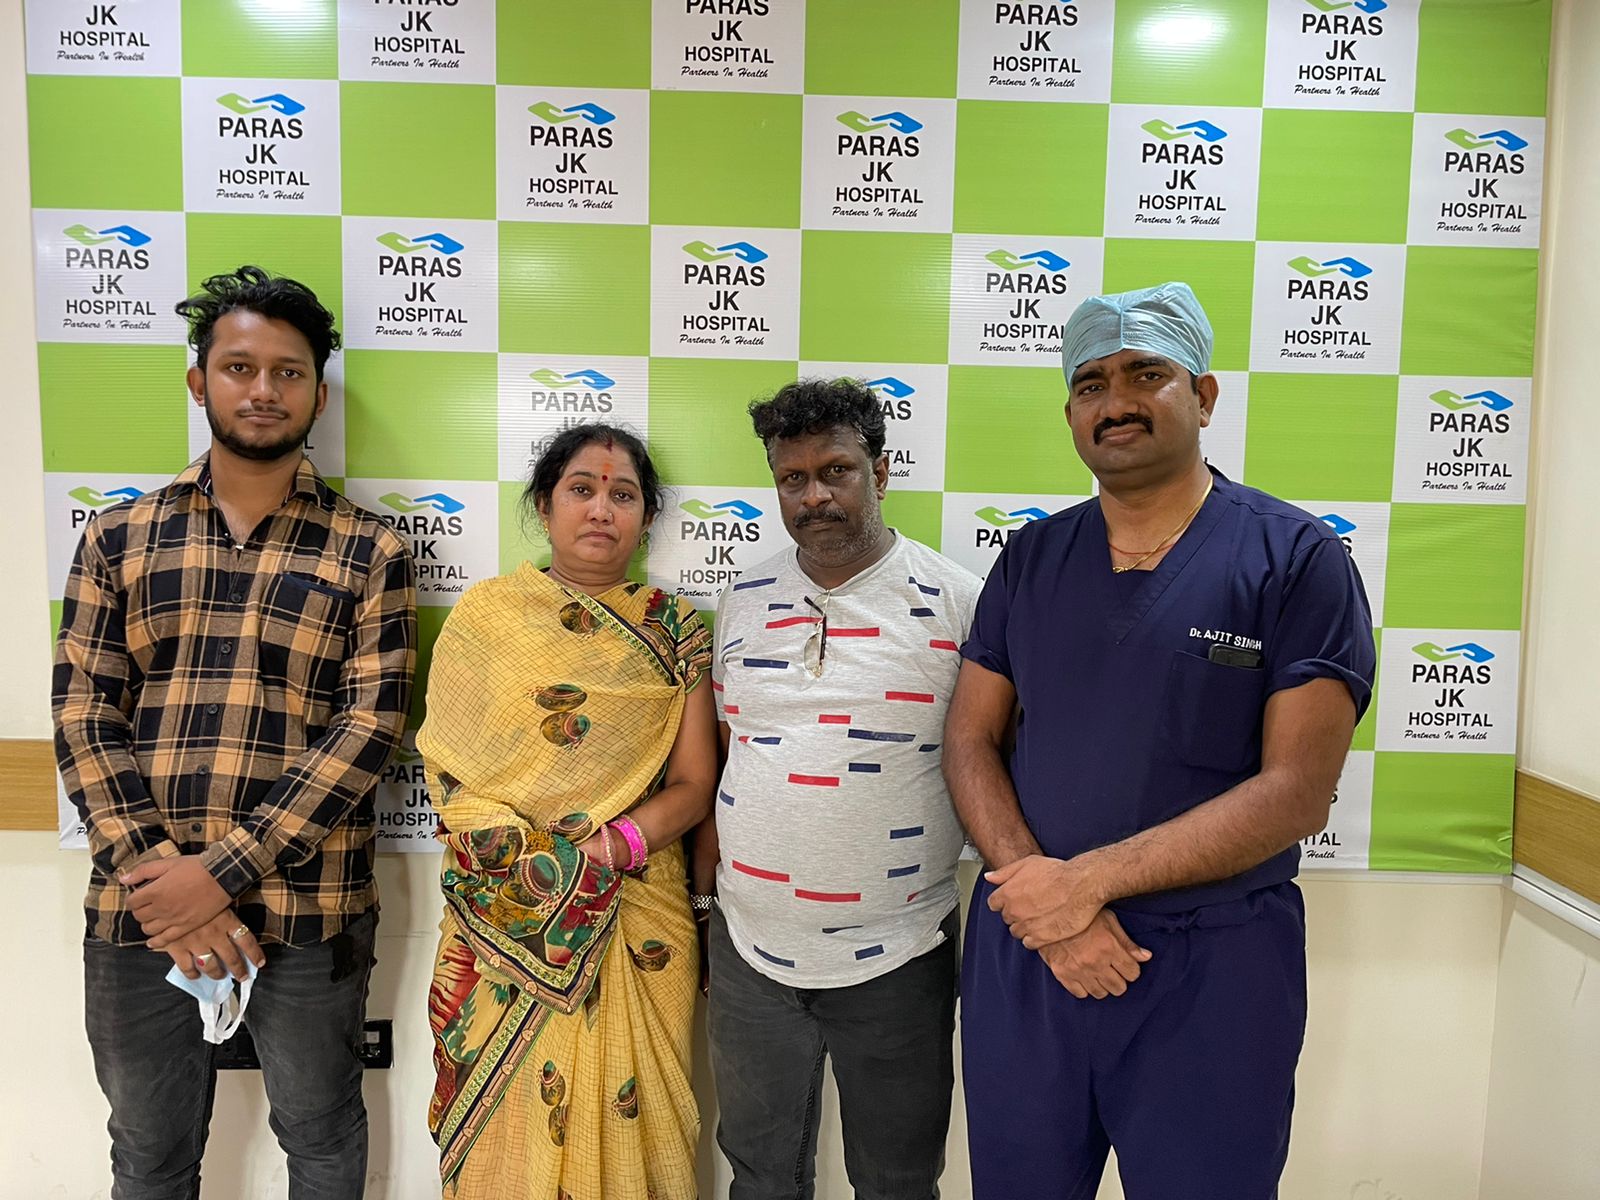 Successful operation of rare cervical Tarlov cyst in Paras JK Hospital